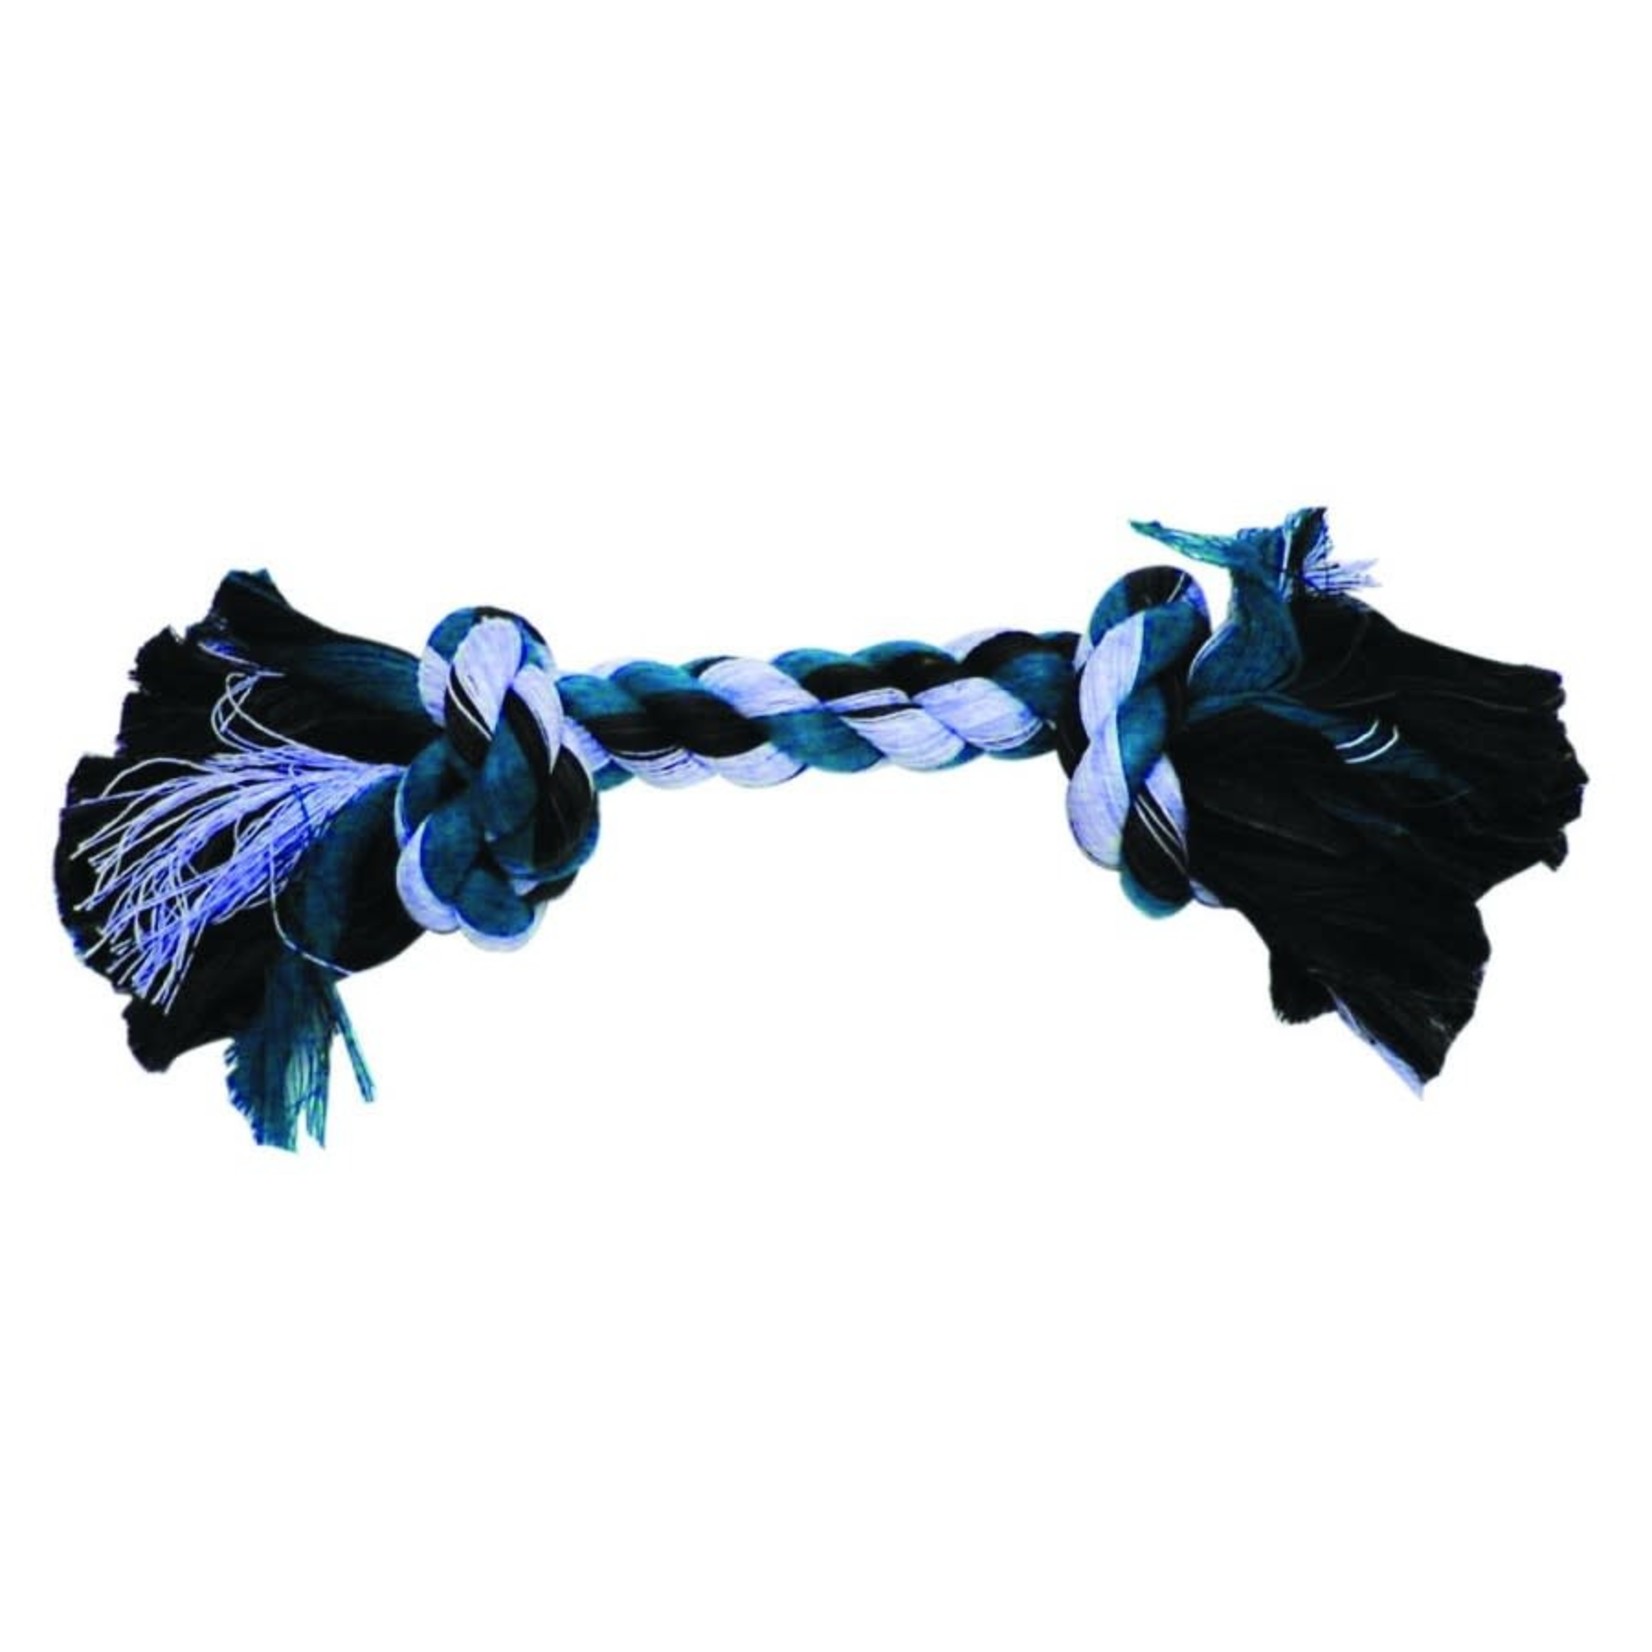 Flossy 3 Knot Tug Rope